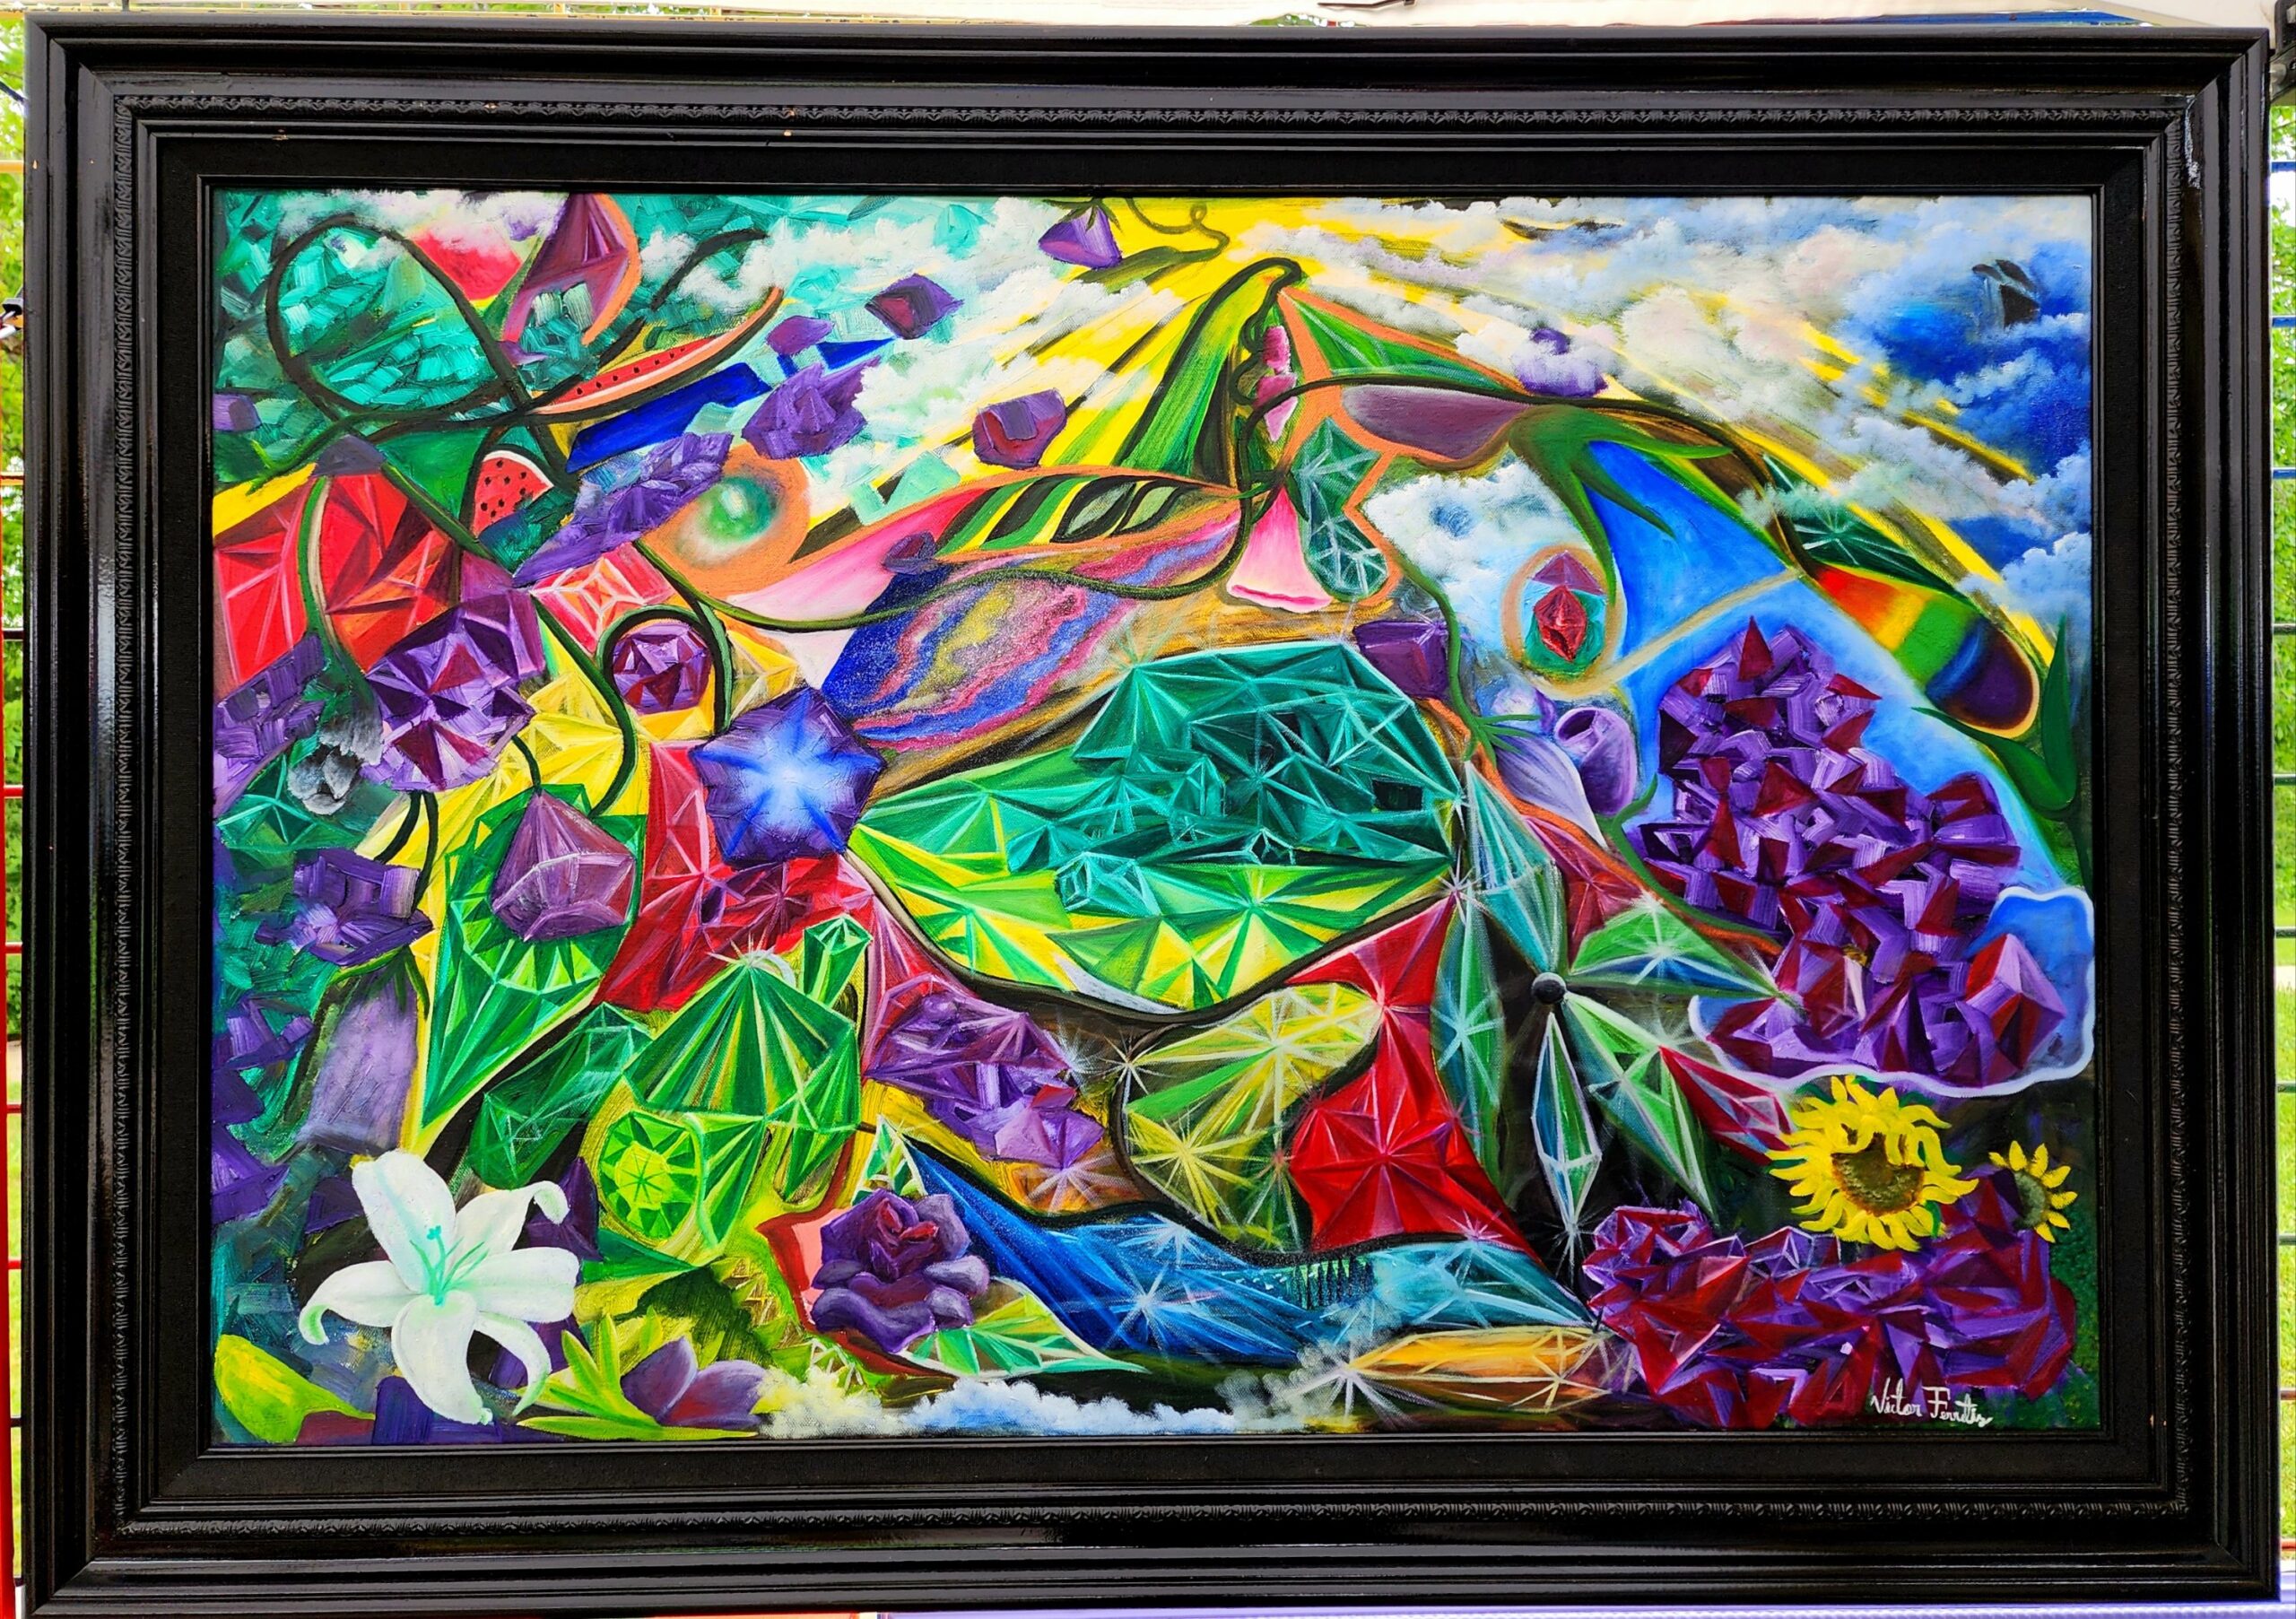 This painting comes with an antique wooden frame, so this might have minor scratches due to age. This beautiful original artwork depicts the beauty of quartz, flowers, and other mystical phenomena of the natural universe.